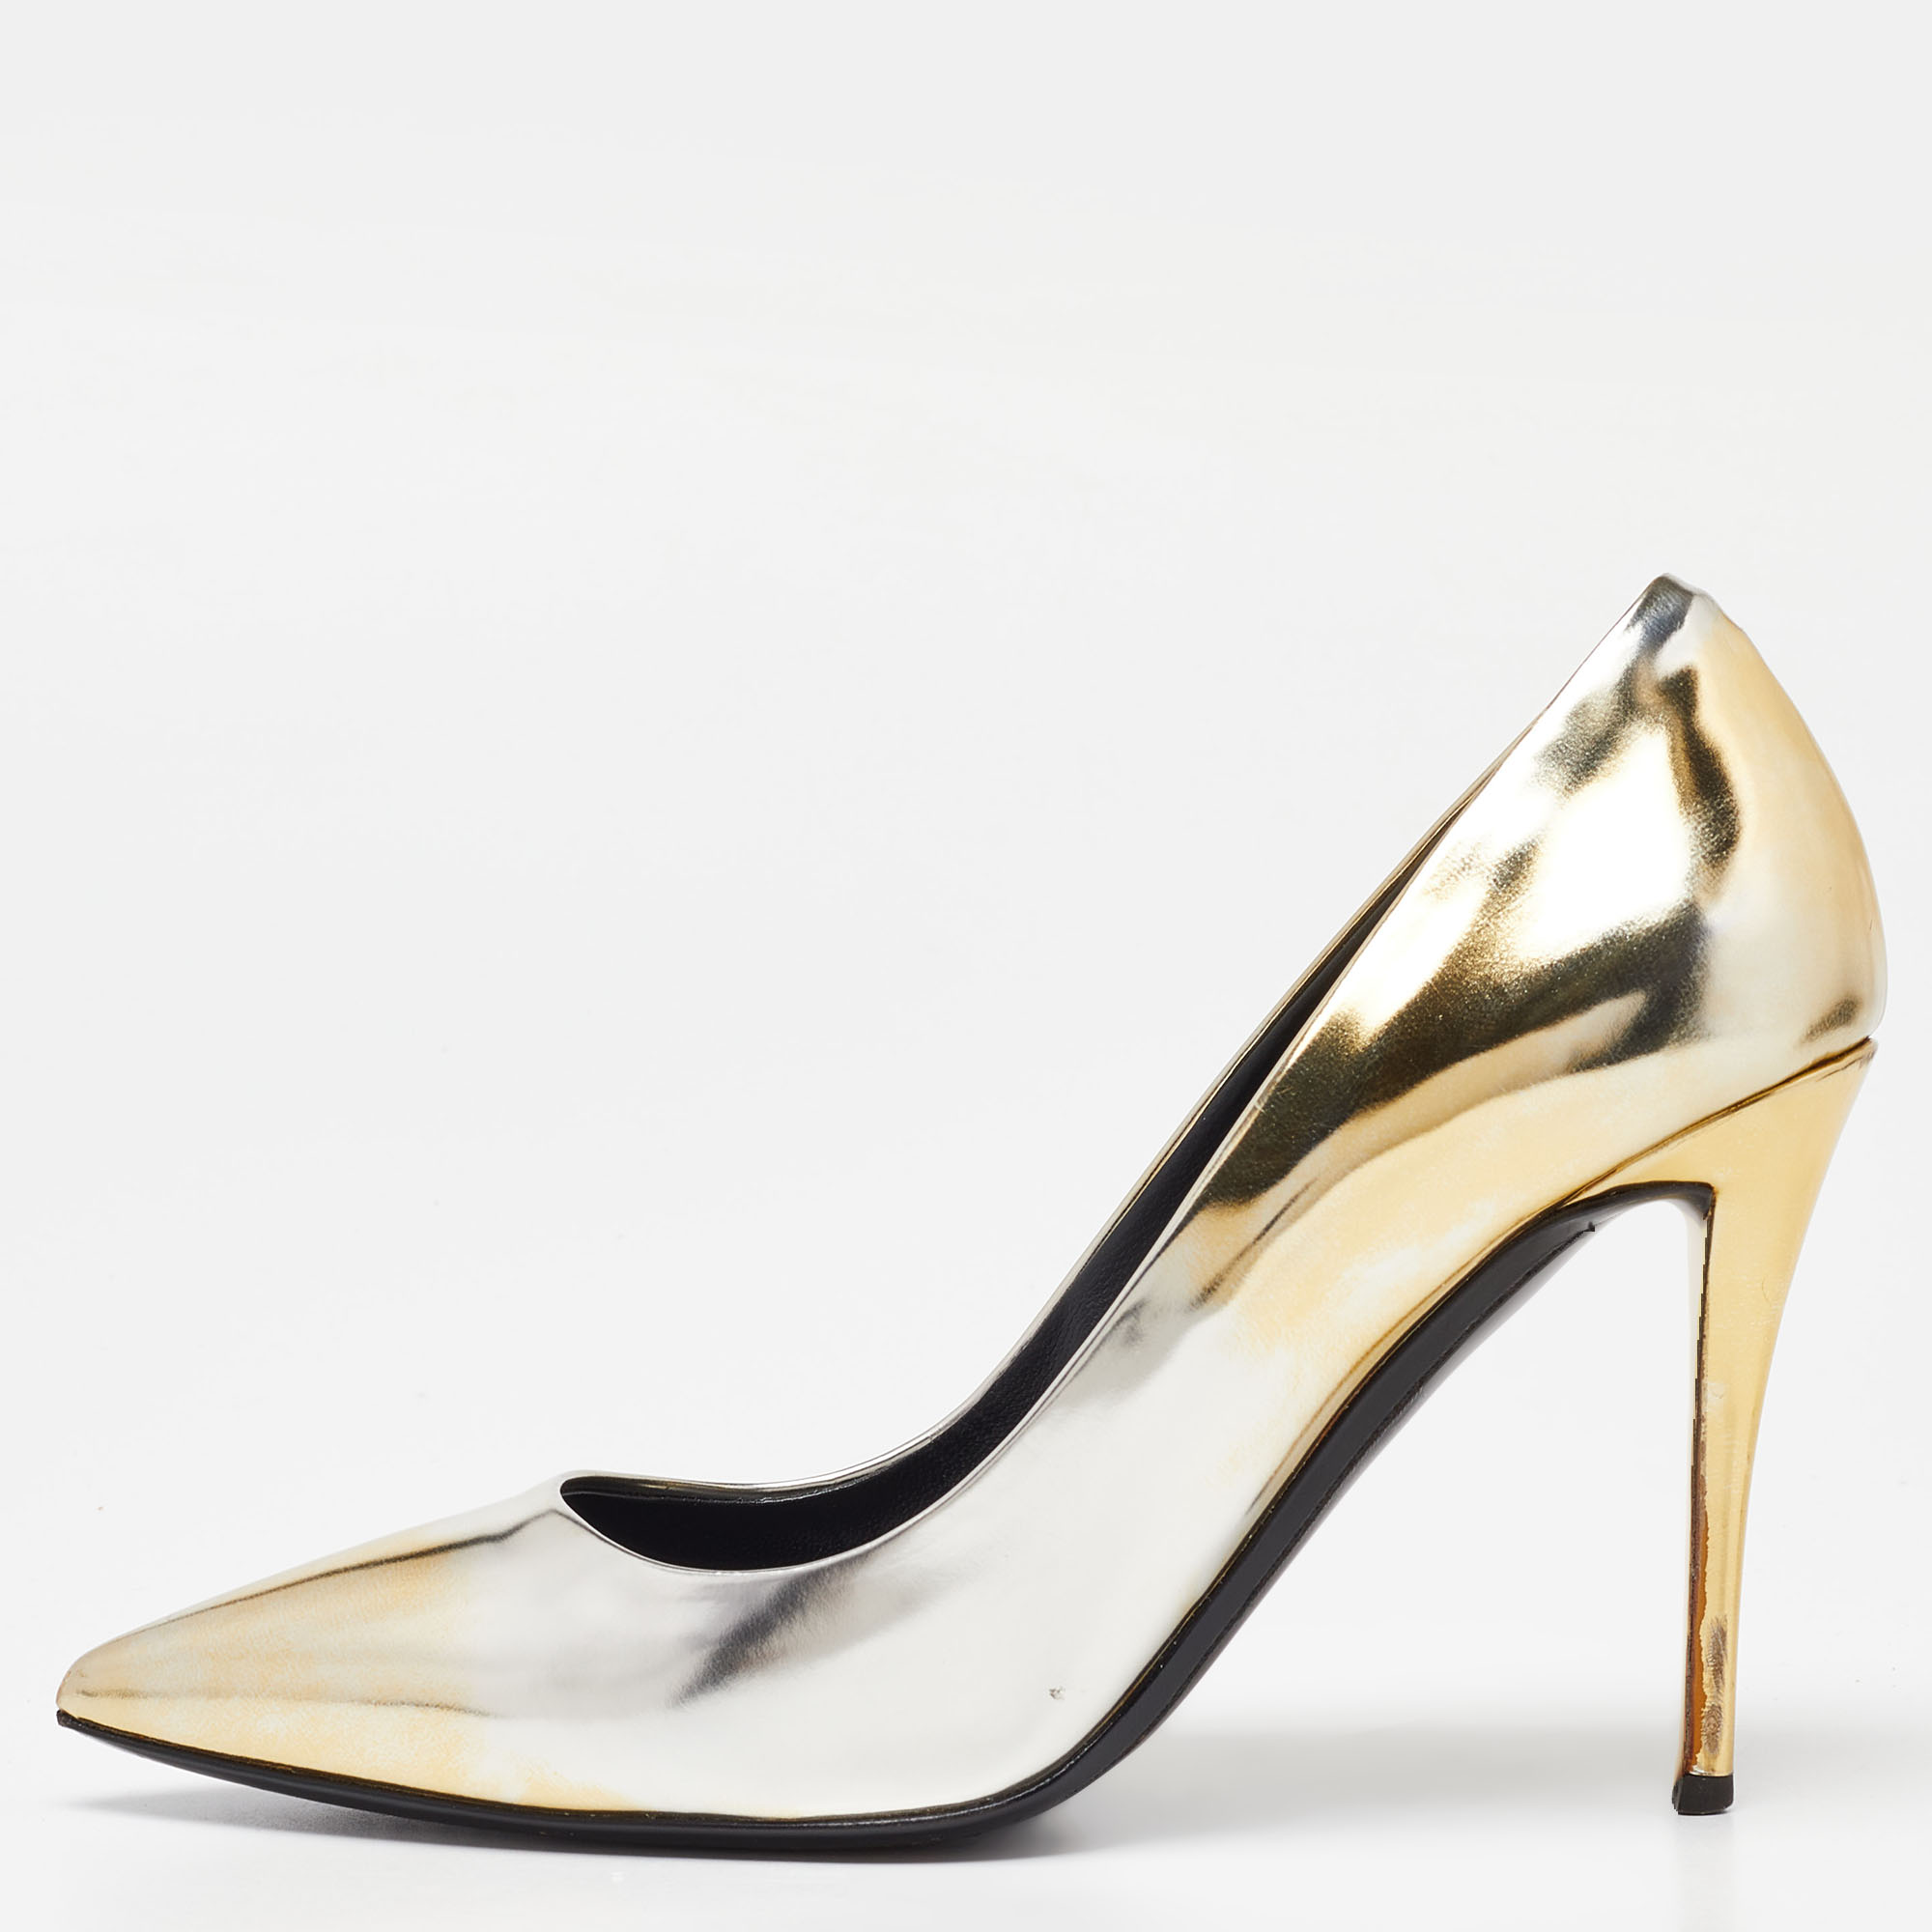 Giuseppe zanotti gold/silver leather pointed toe pumps size 35